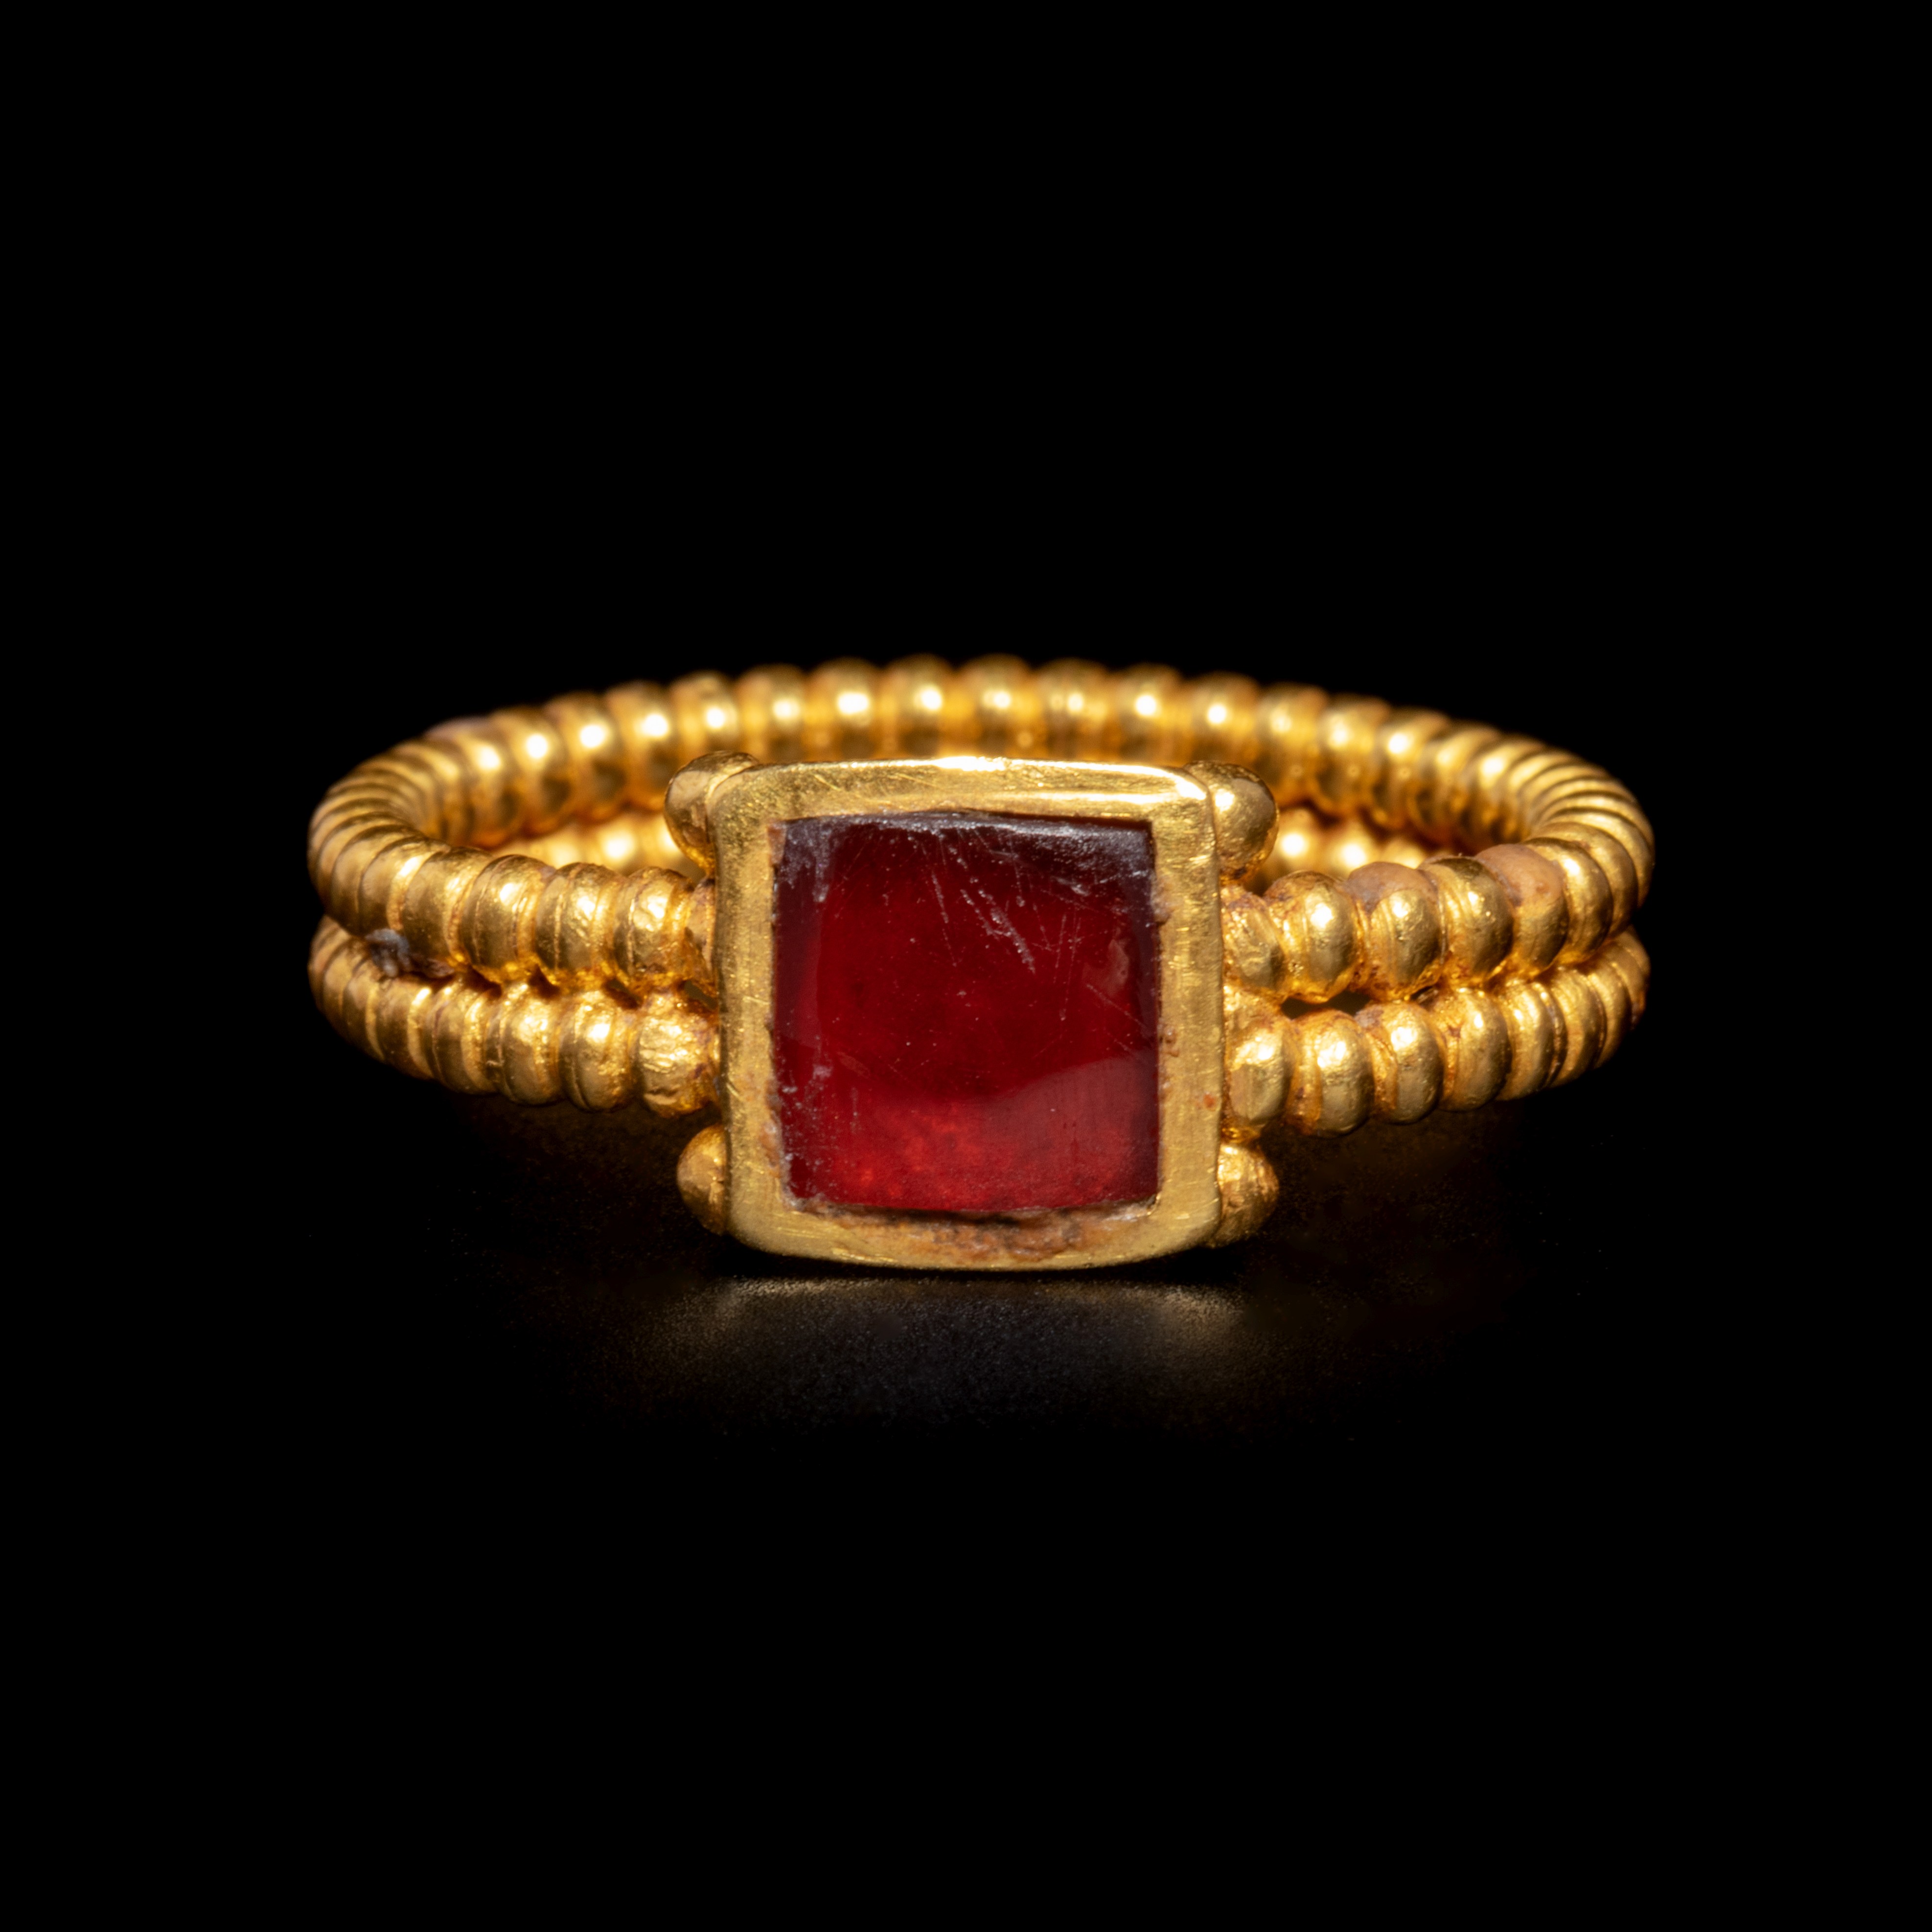 A Roman Gold and Garnet Finger Ring with Cabochon Ring size 3 1/3; Length of garnet 1/4 inch (0.5 cm